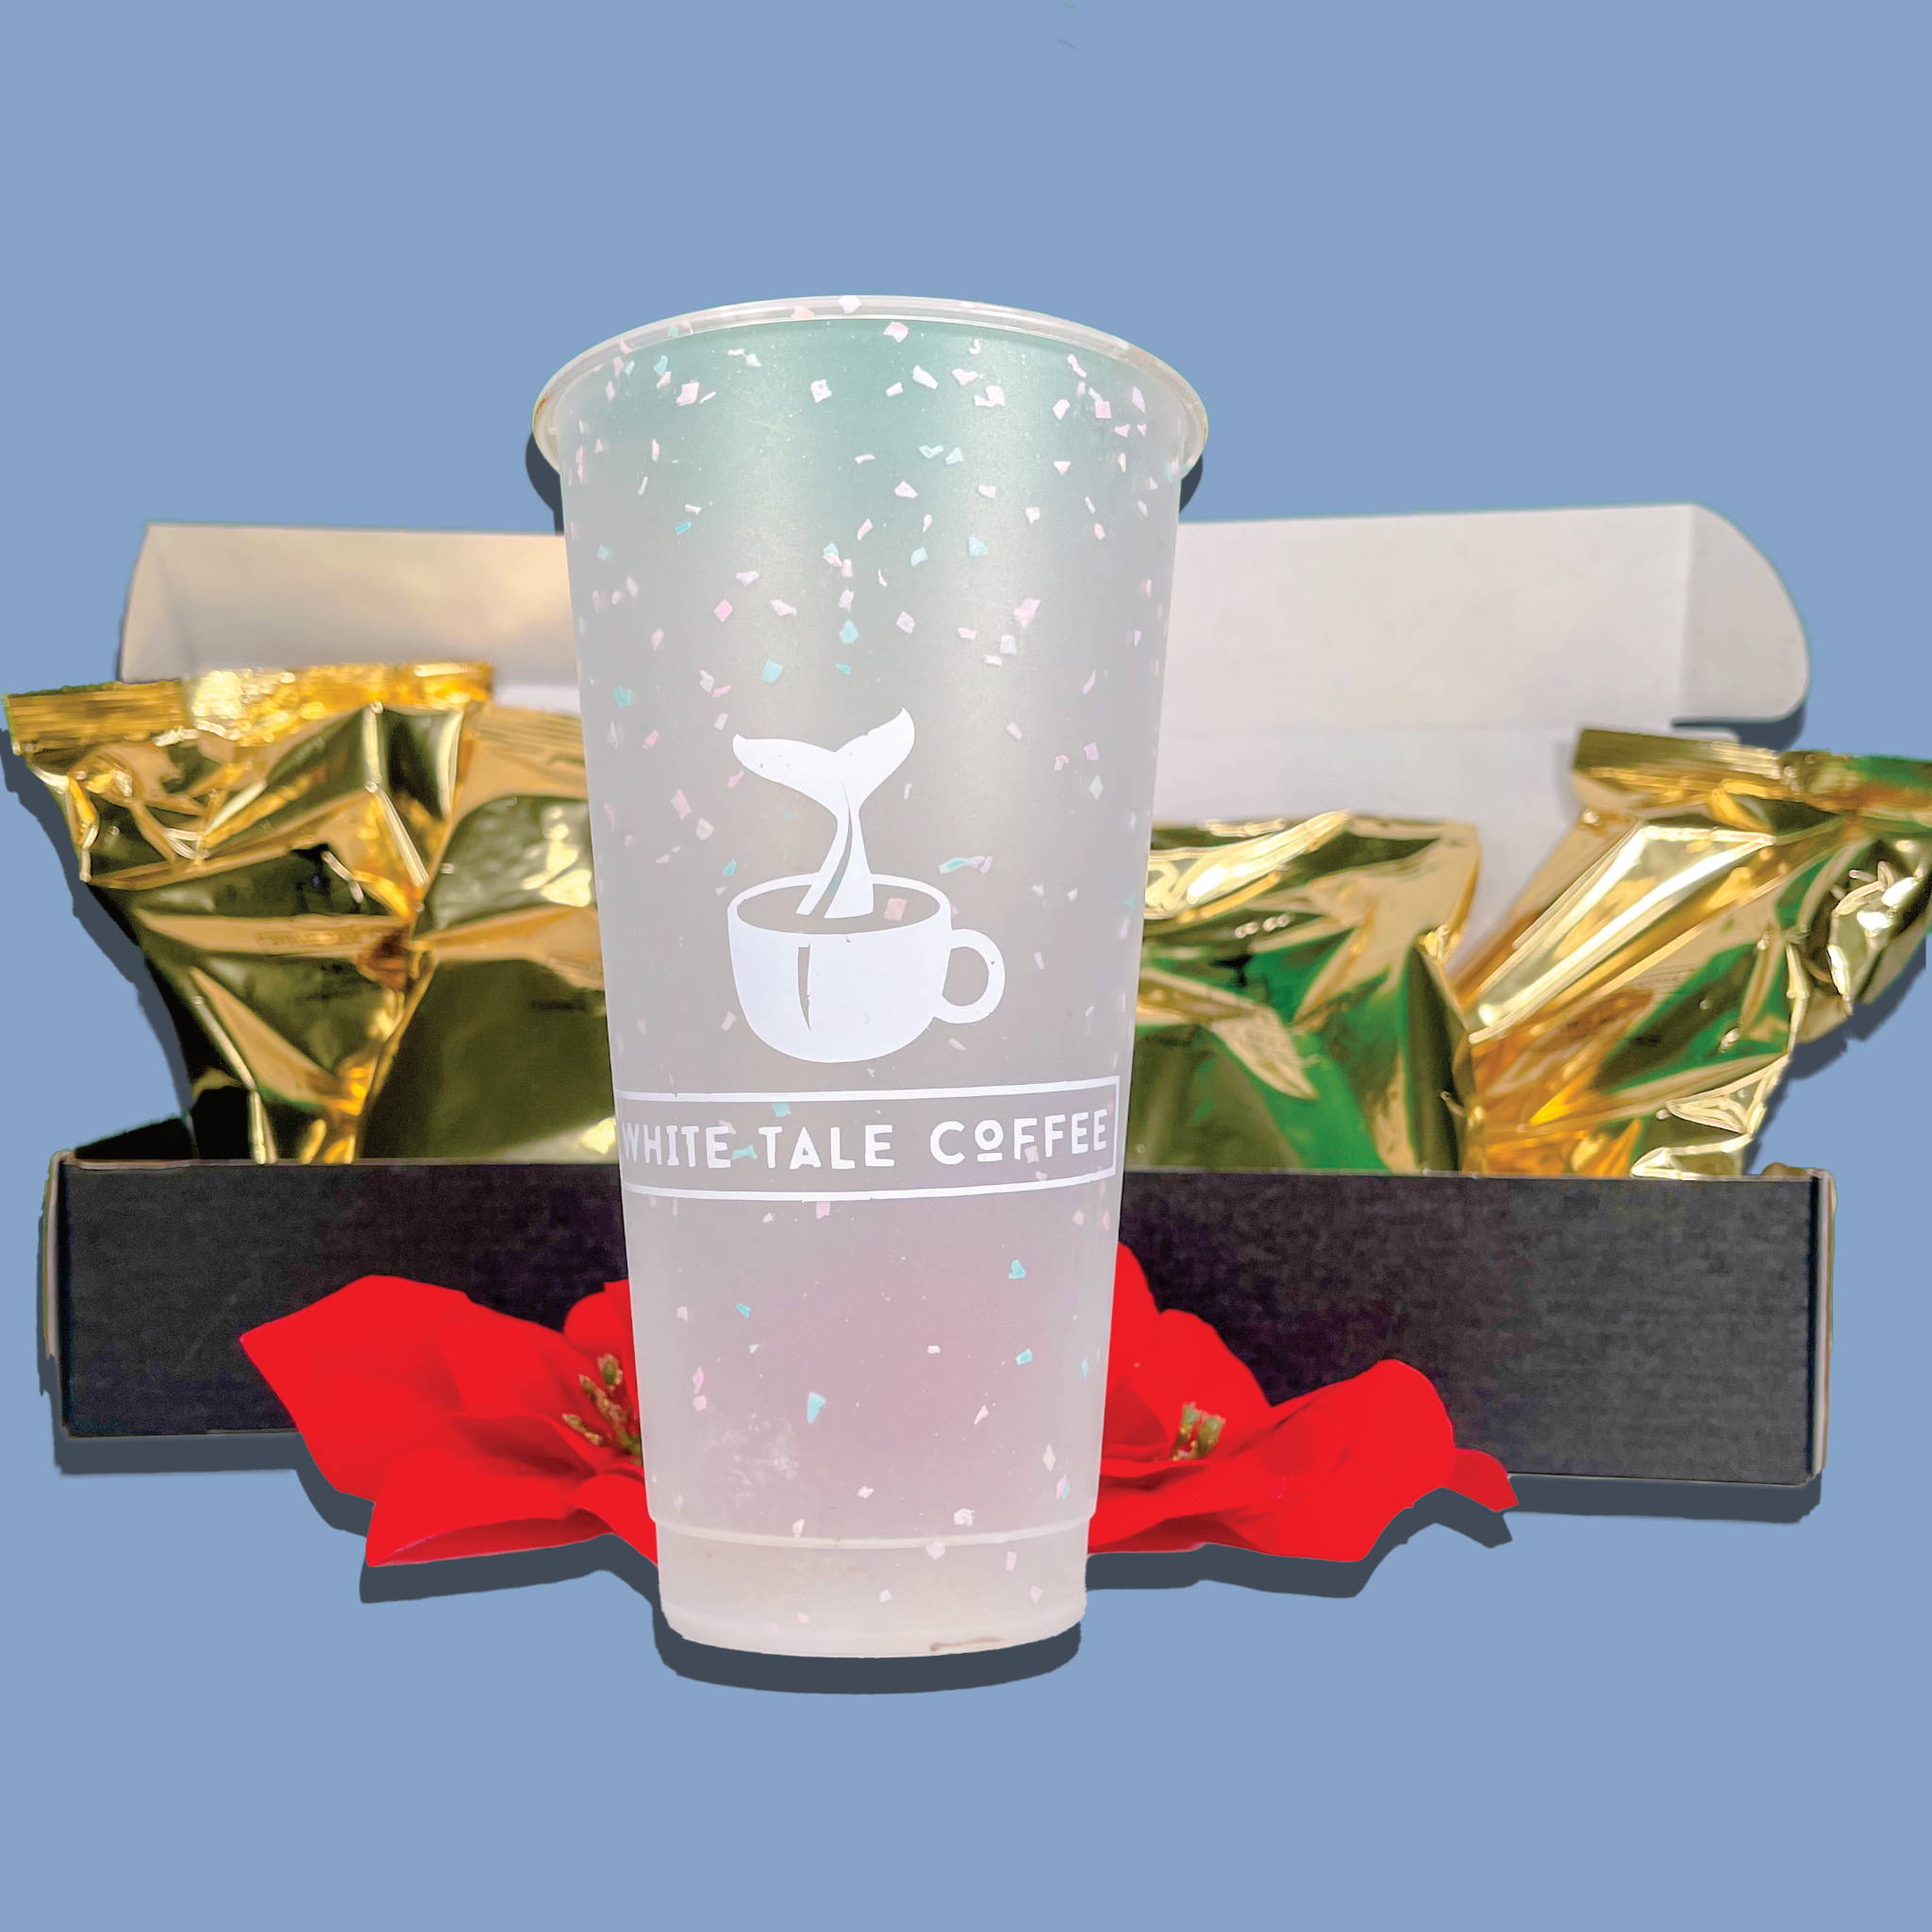 For your favorite iced coffee sippin’- cold brew lovin’ bestie! Our cold brew pouches make an entire pitcher of rich cold coffee. Comes with four ready-to-brew pouches of premium 100 percent Arabica coffee and a White Tale Coffee sprinkle tumbler.